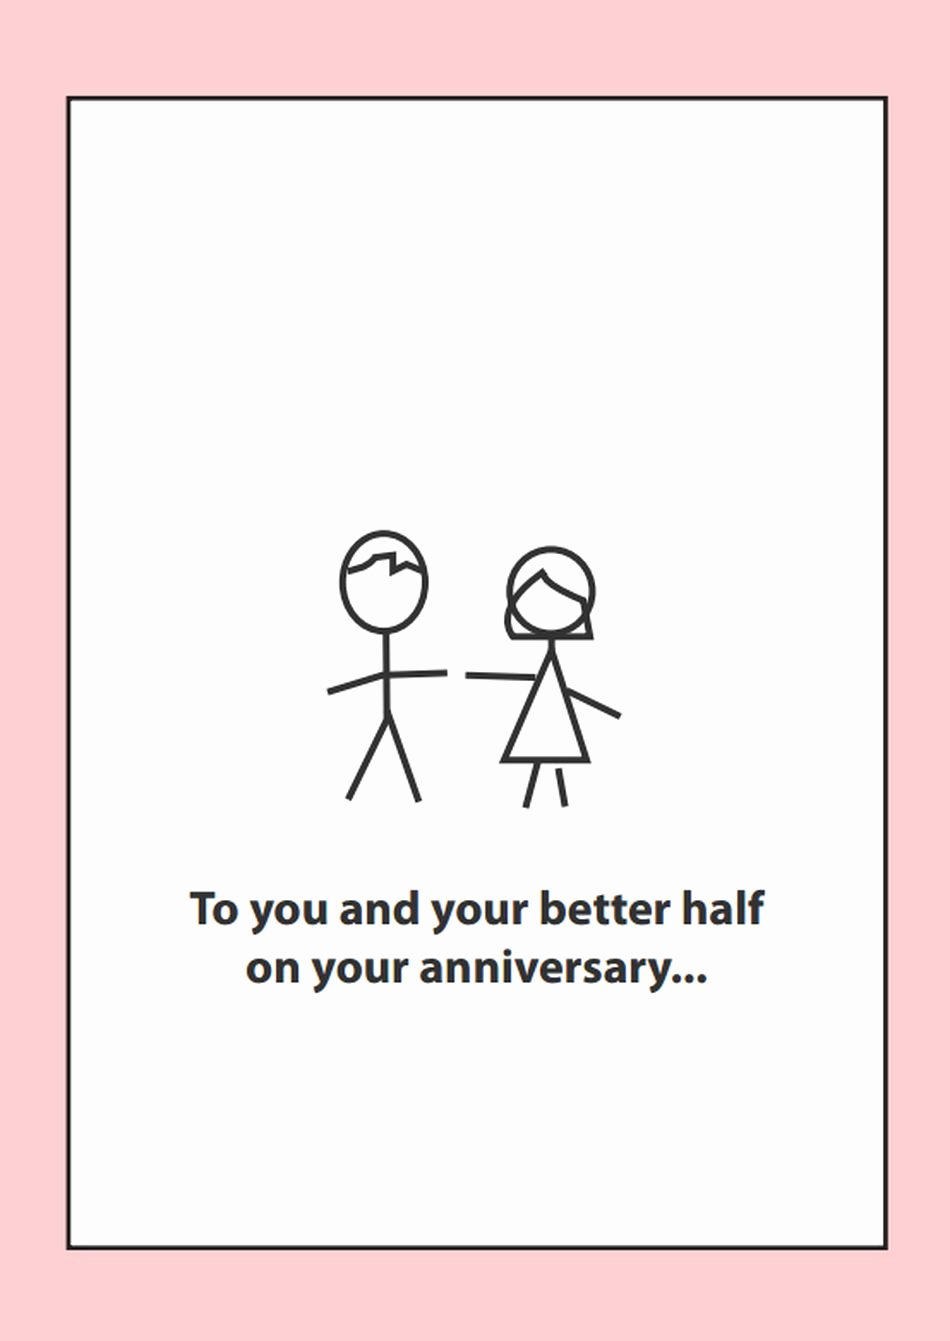 Printable Anniversary Cards Free Online Unique 16 Free Anniversary Cards You Can Print